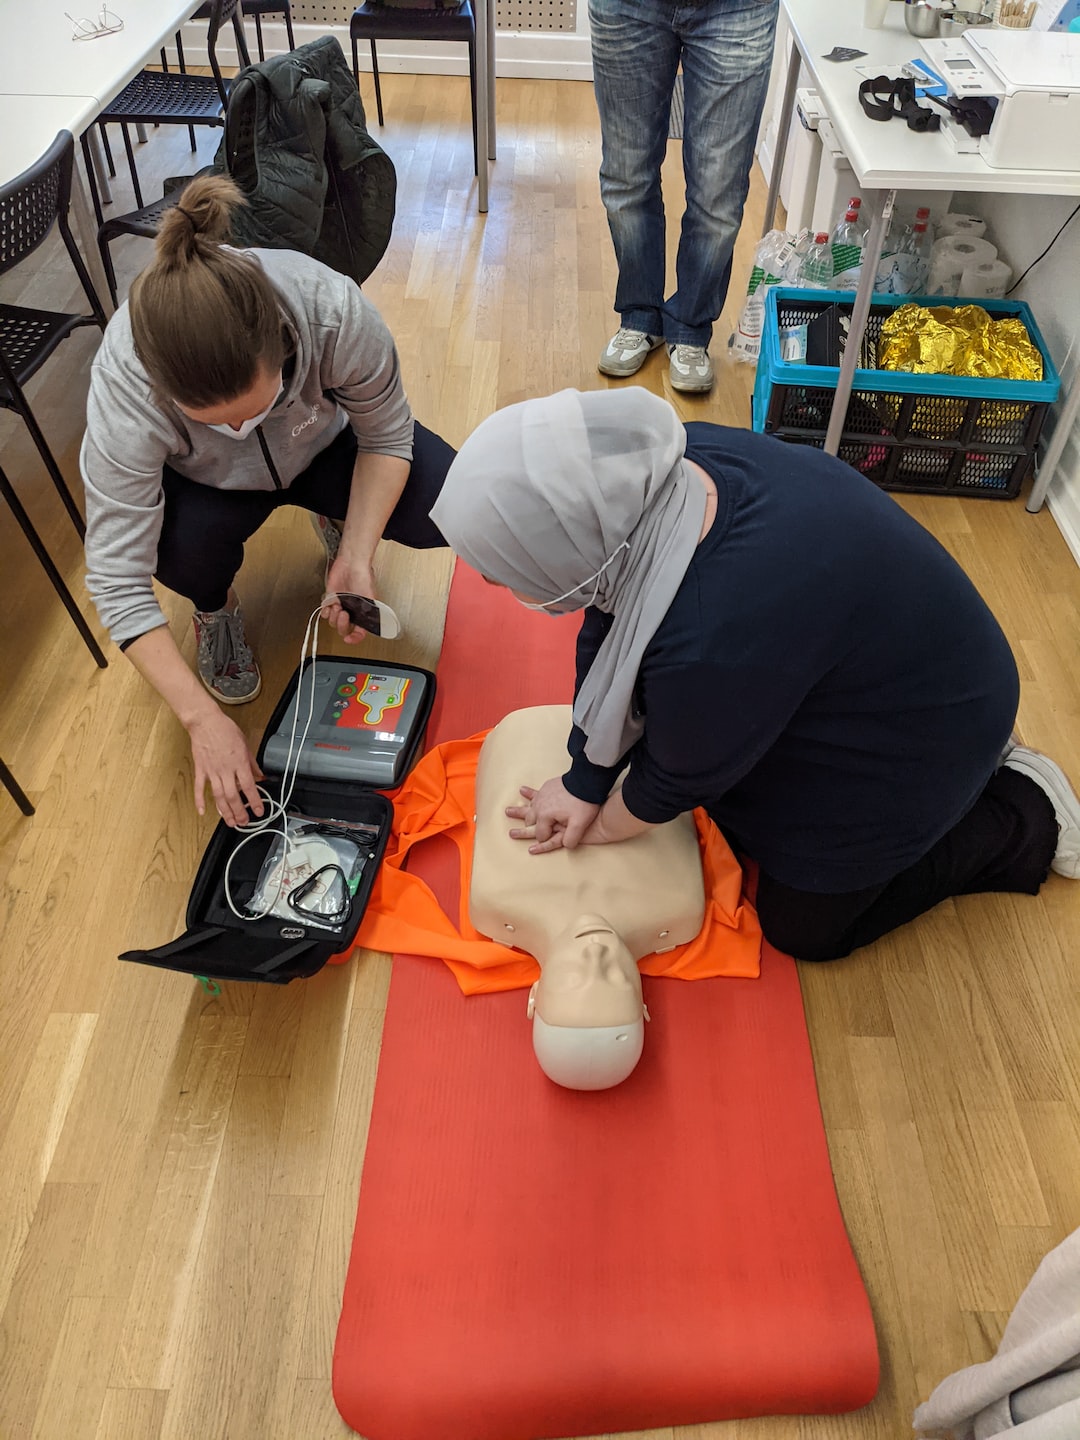 Finding the right class for getting certified in CPR requires knowing your options. This guide explains everything to know about choosing CPR classes.